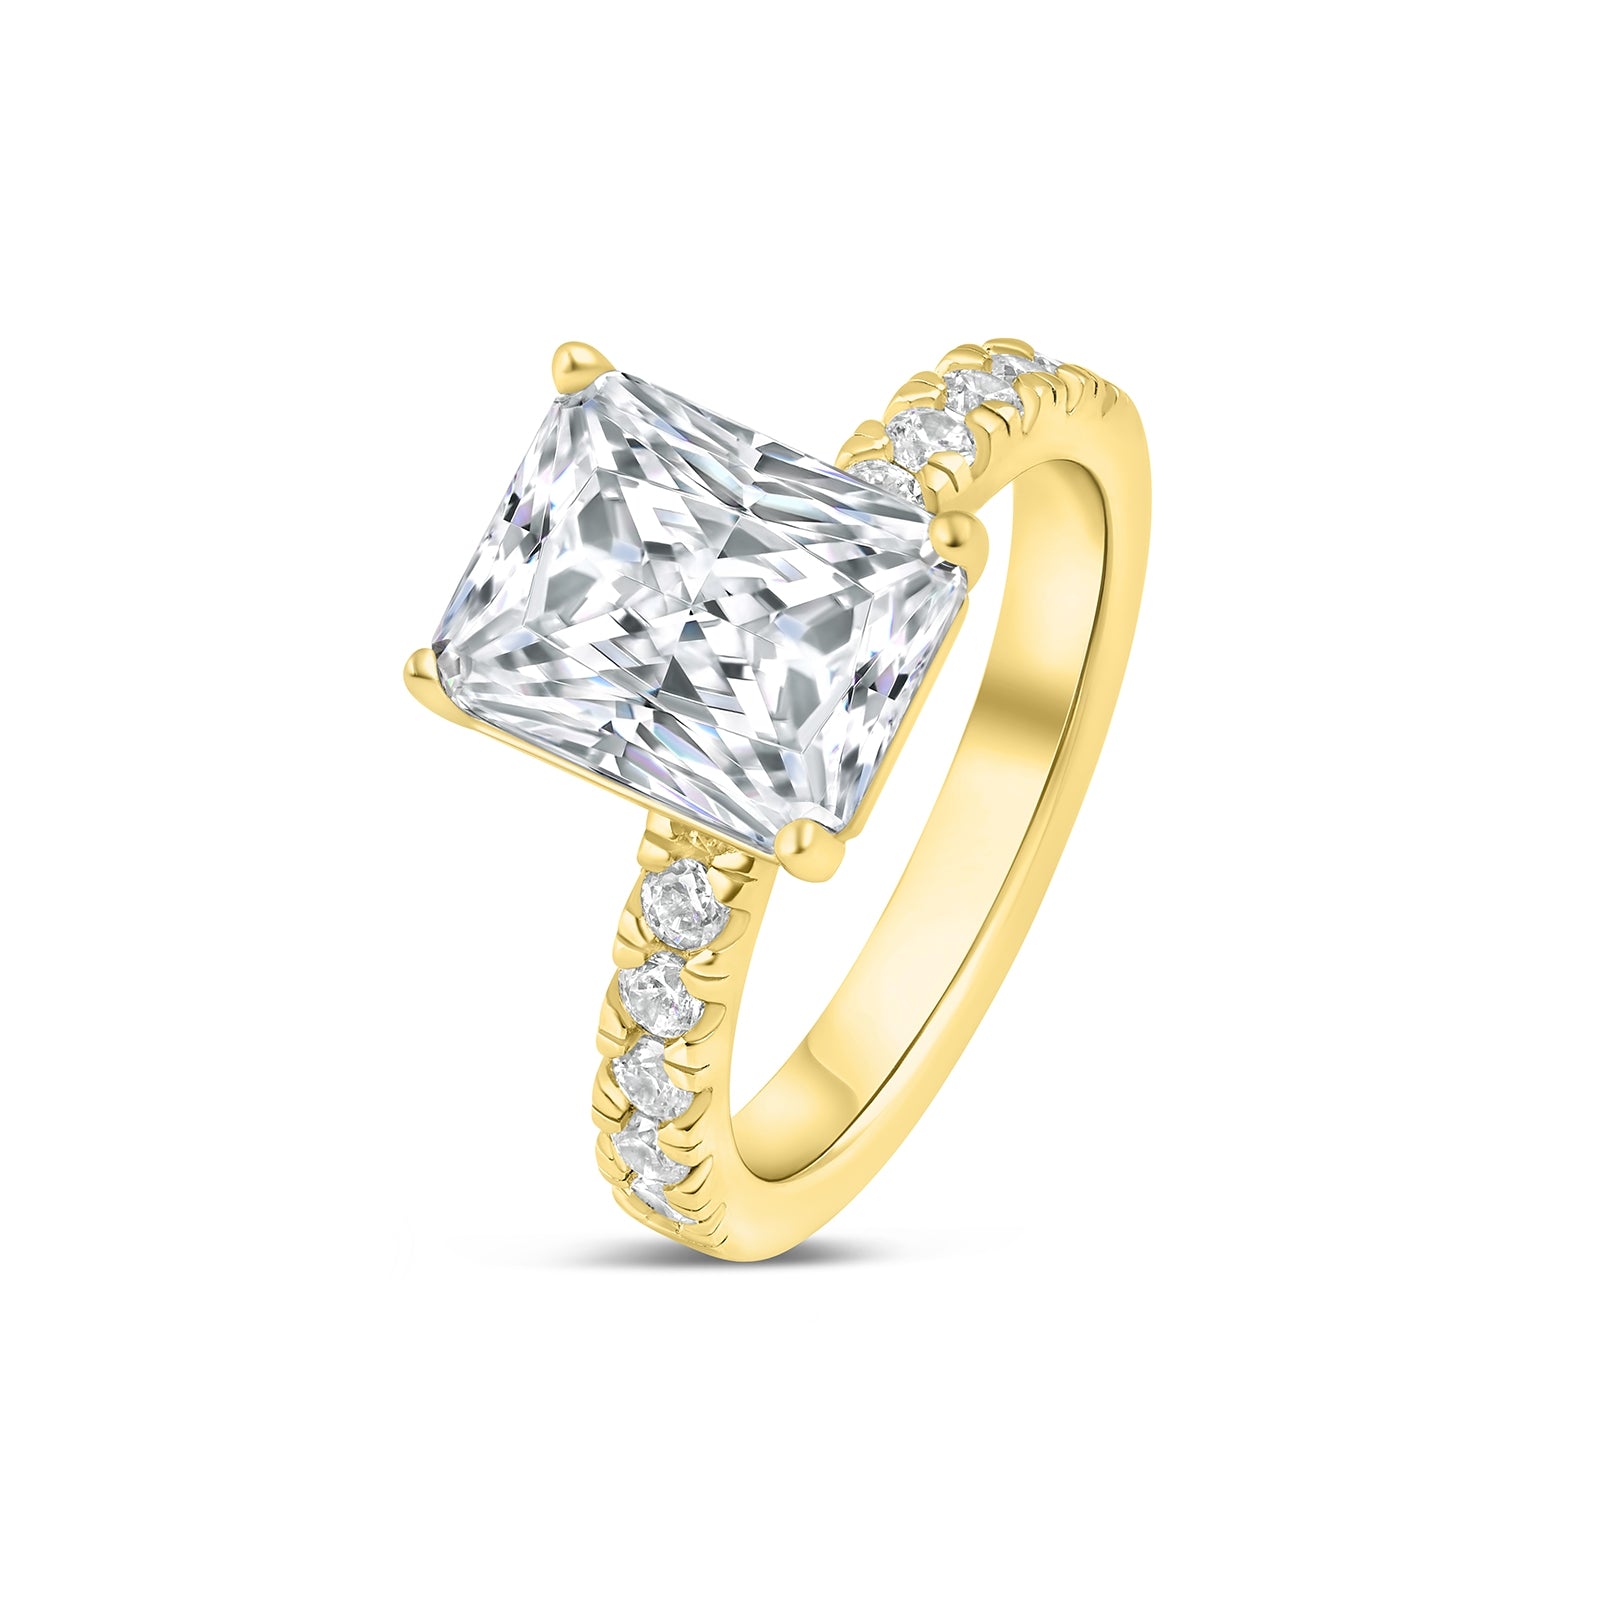 Classic 3.75 carat radiant cut engagement ring with half eternity band detailing tilted to its side in gold